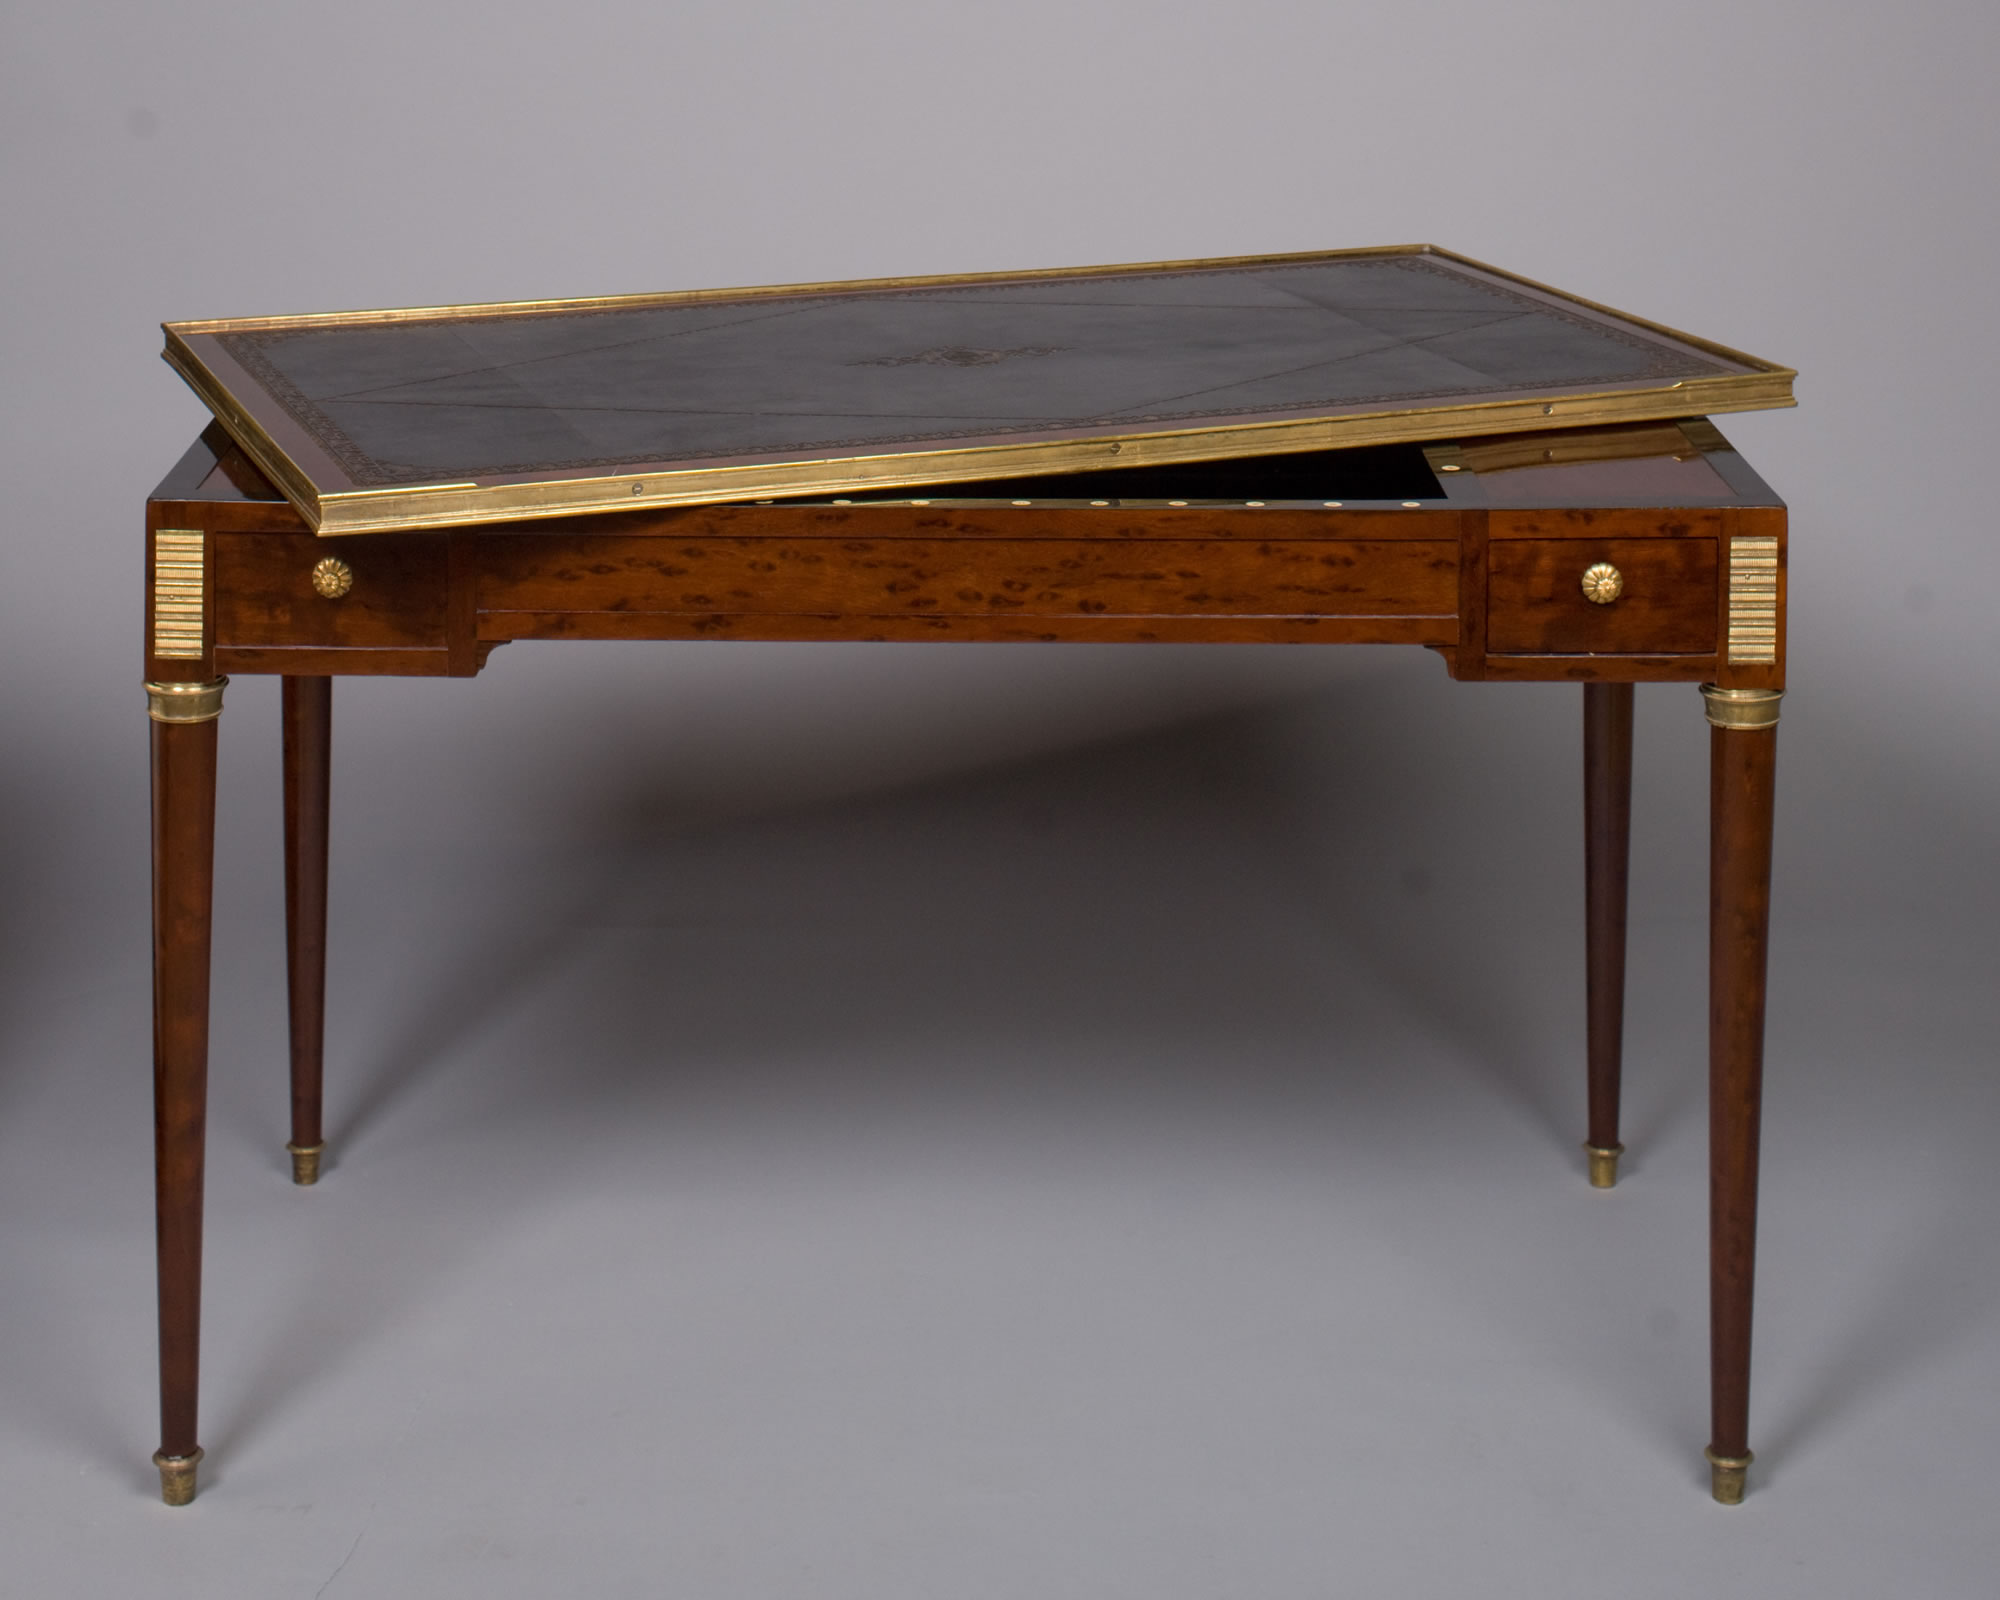 French Louis XVI Period, Tric Trac Table Stamped, “BENEMAN”